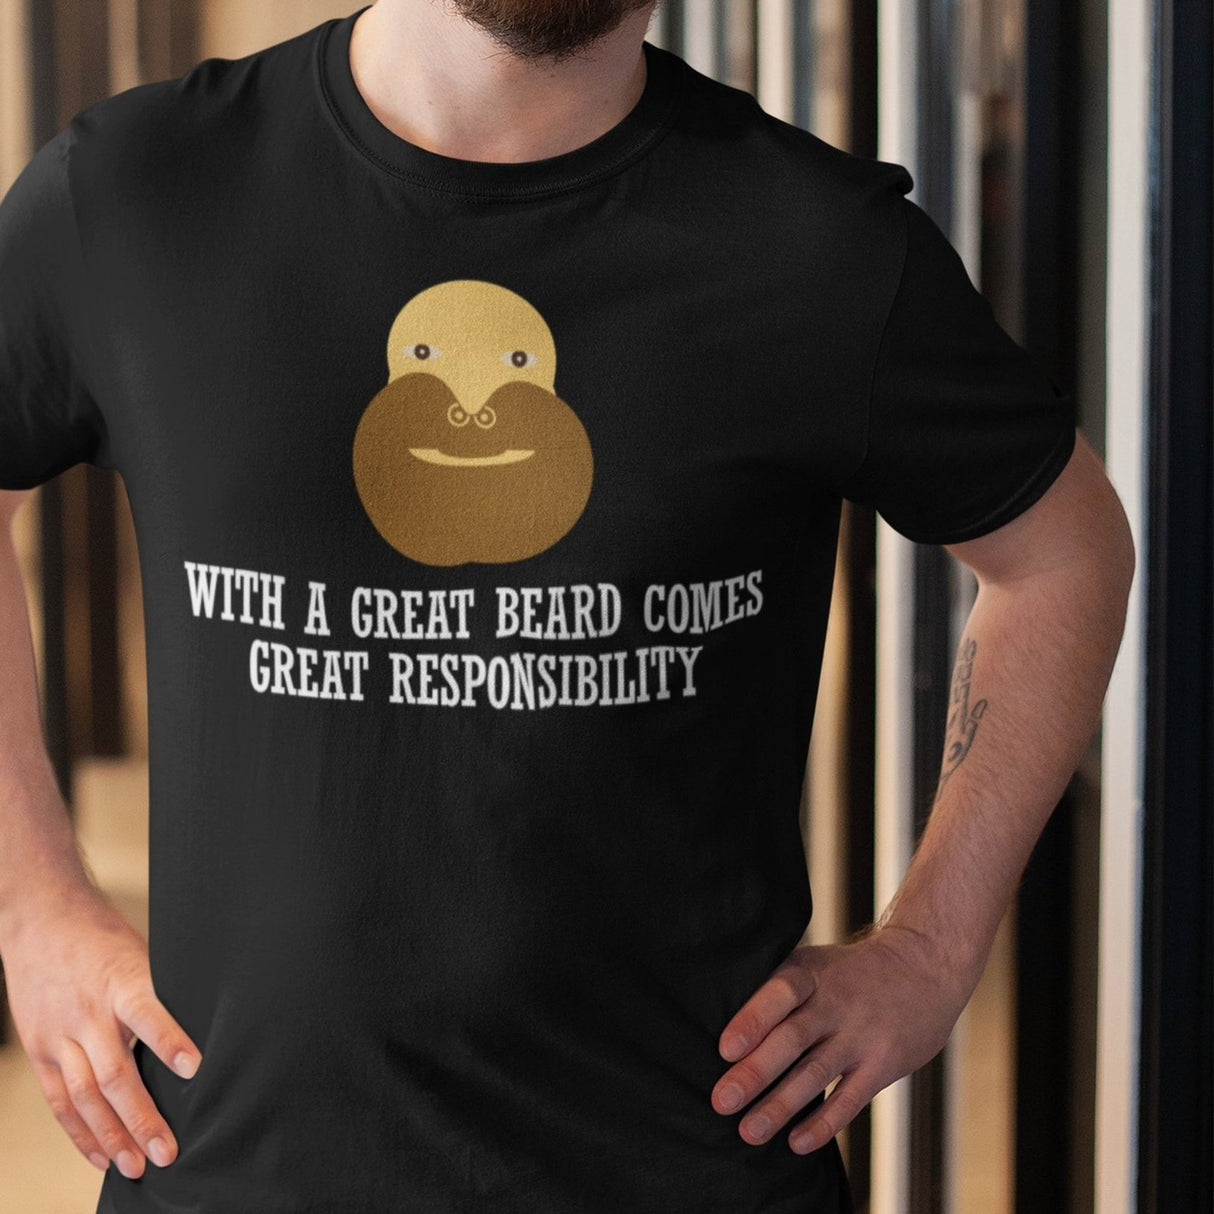 with-a-great-beard-comes-great-responsibility-beard-tee-responsibility-t-shirt-great-beard-tee-mens-t-shirt-gift-tee#color_black